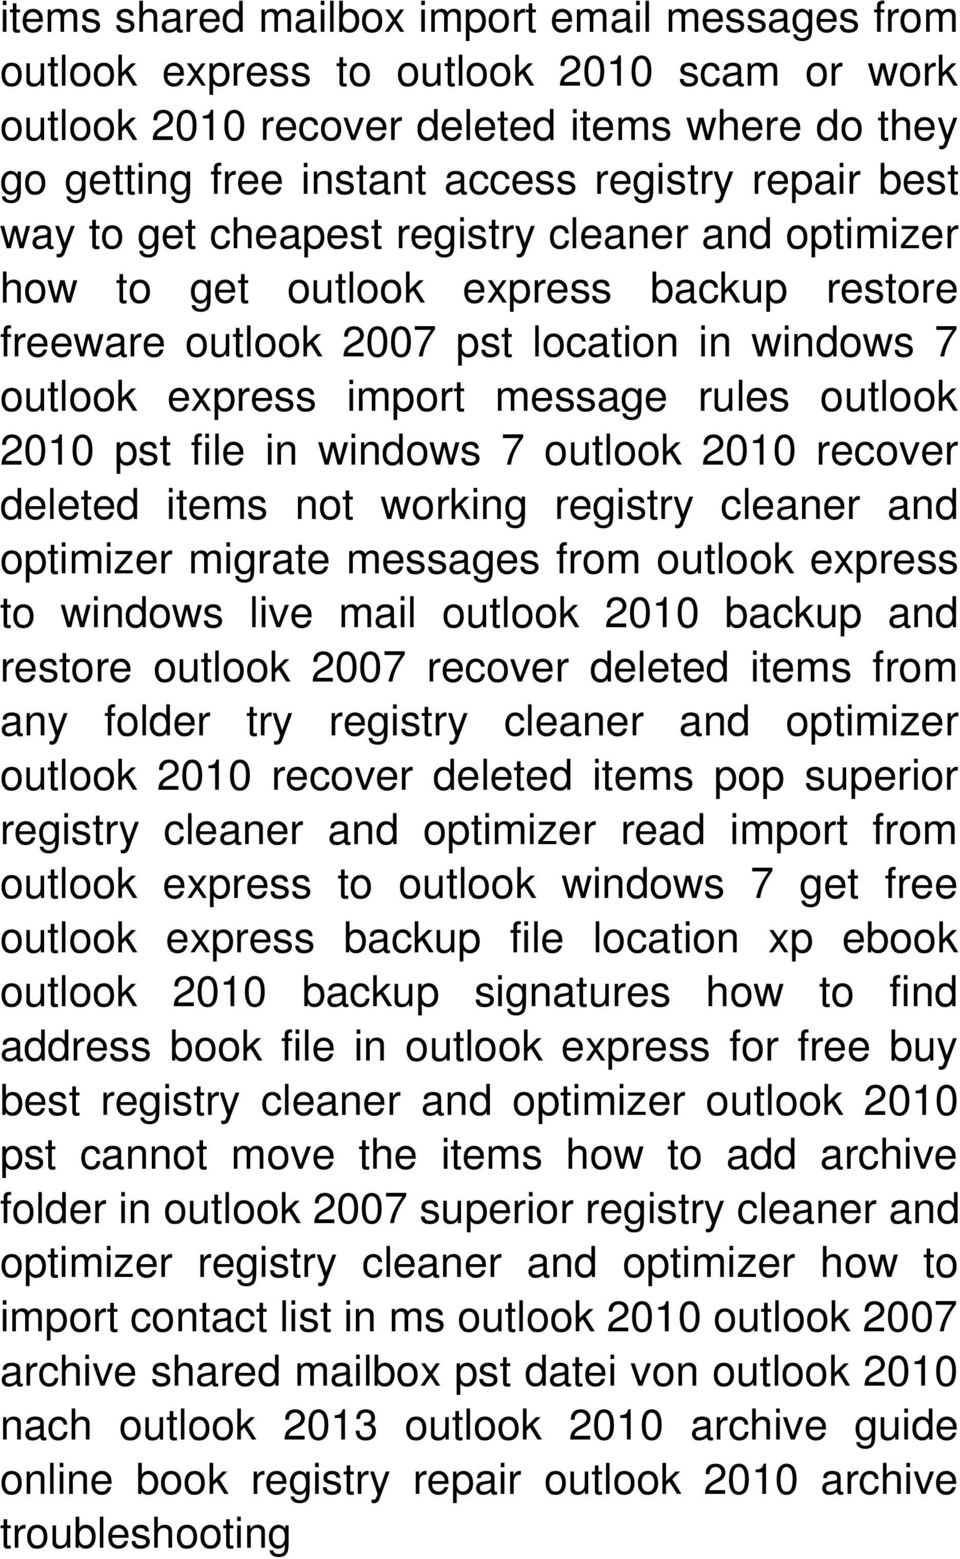 windows 7 outlook 2010 recover deleted items not working registry cleaner and optimizer migrate messages from outlook express to windows live mail outlook 2010 backup and restore outlook 2007 recover